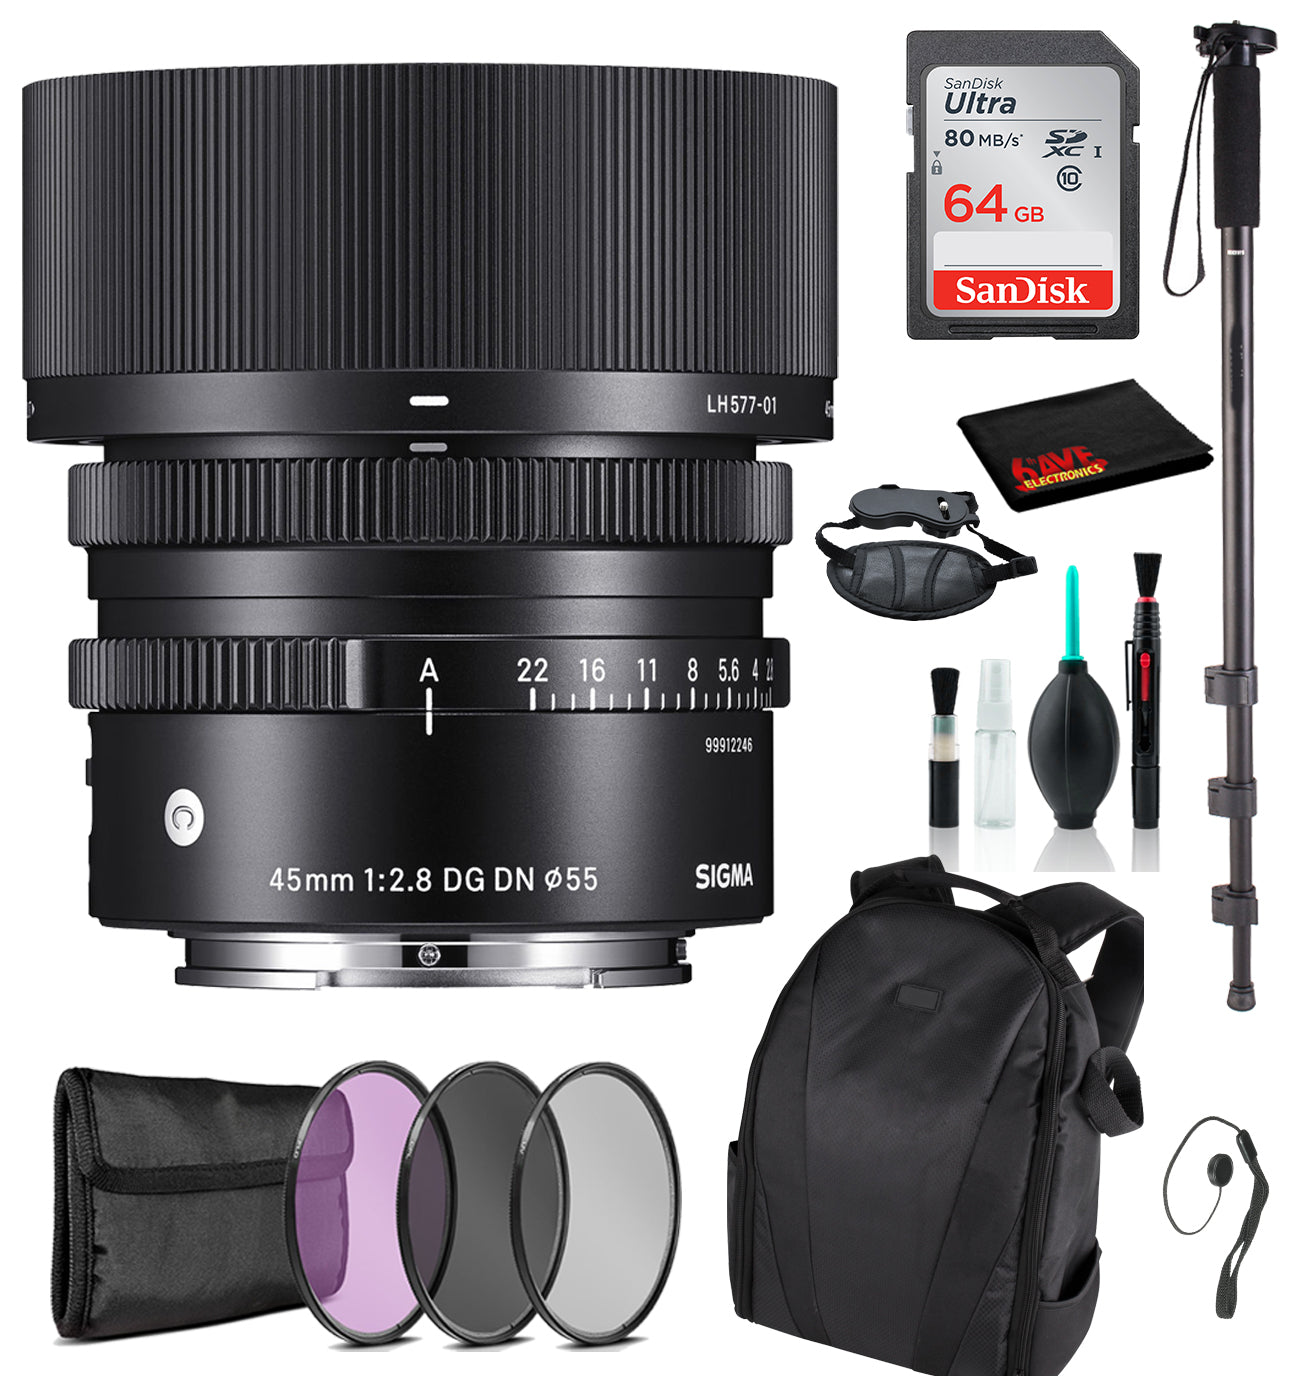 Sigma 45mm f/2.8 DG DN Contemporary Lens for Sony E with Advance Bundle: Backpack + Sandisk 64gb SD+ More